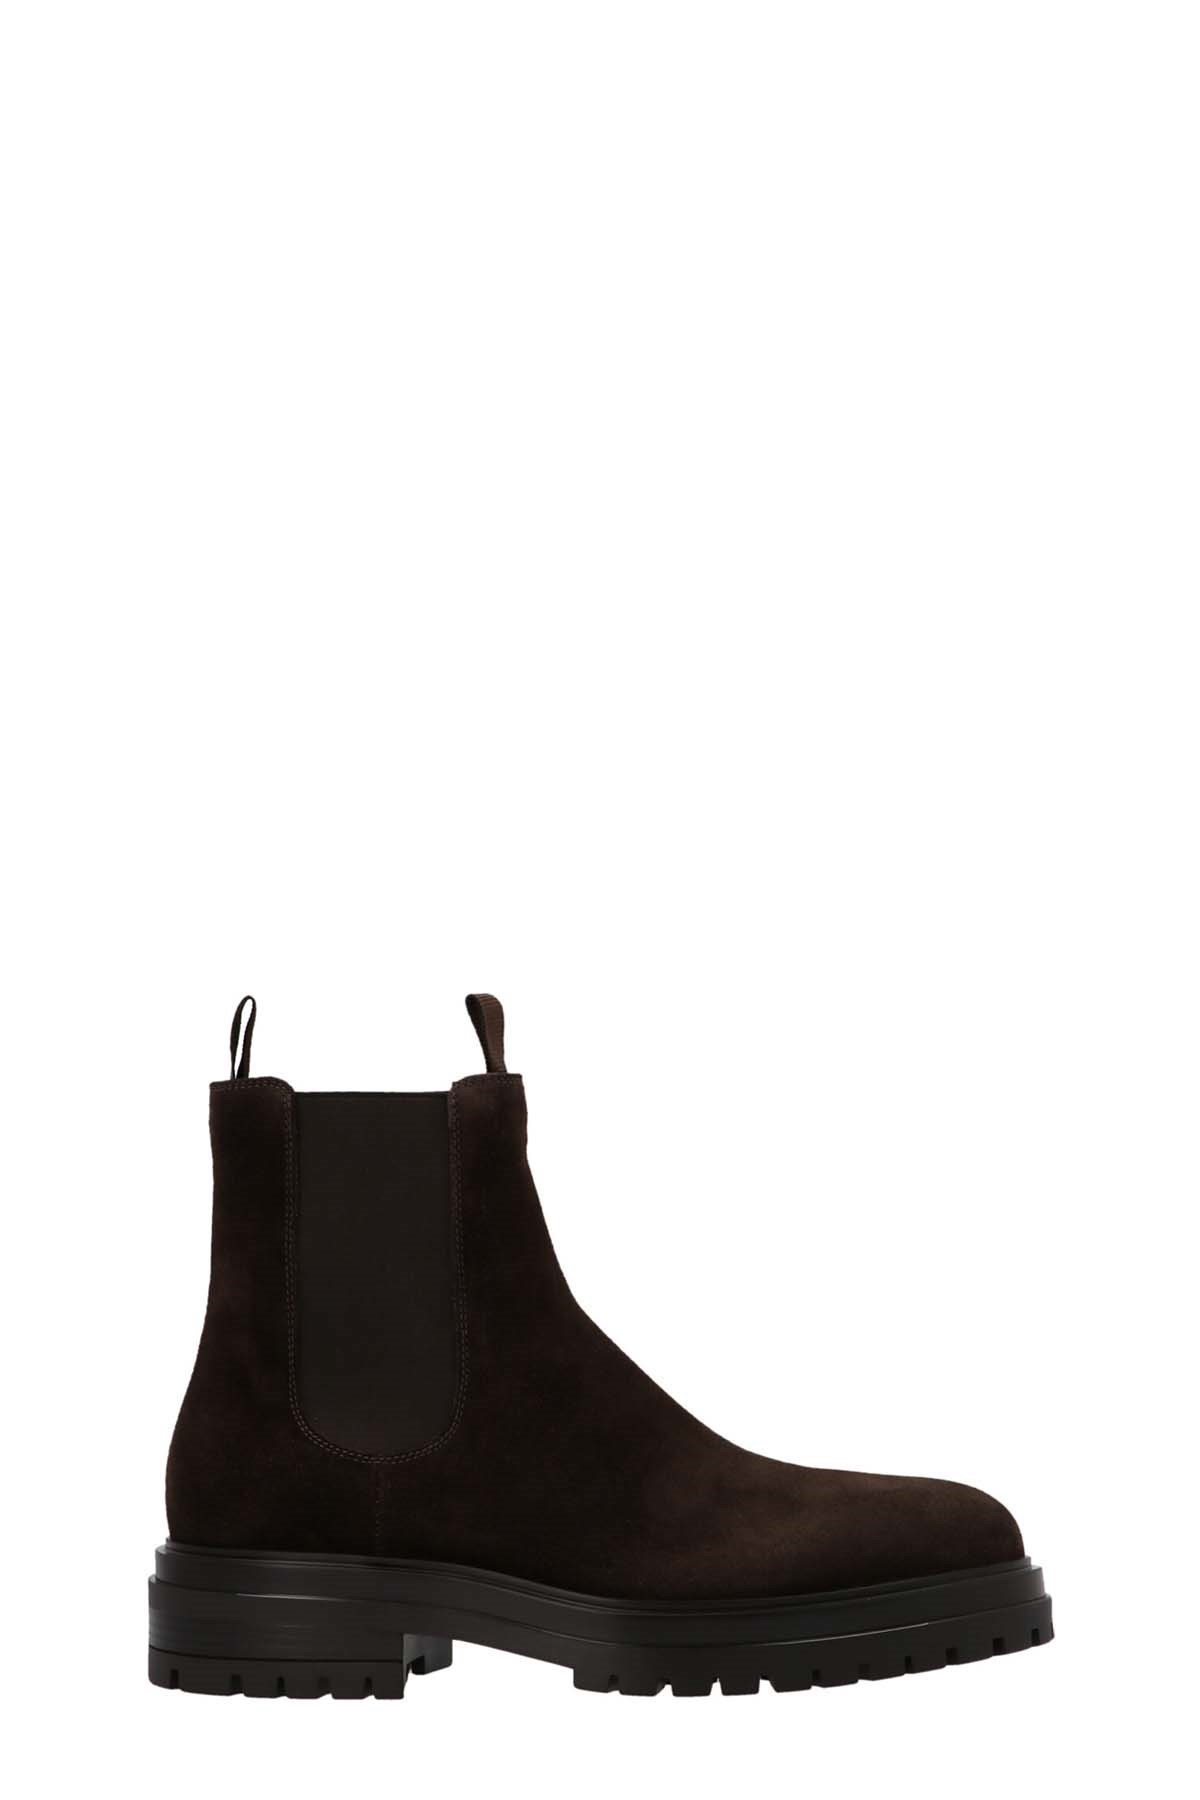 GIANVITO ROSSI 'Chester’ Ankle Boots